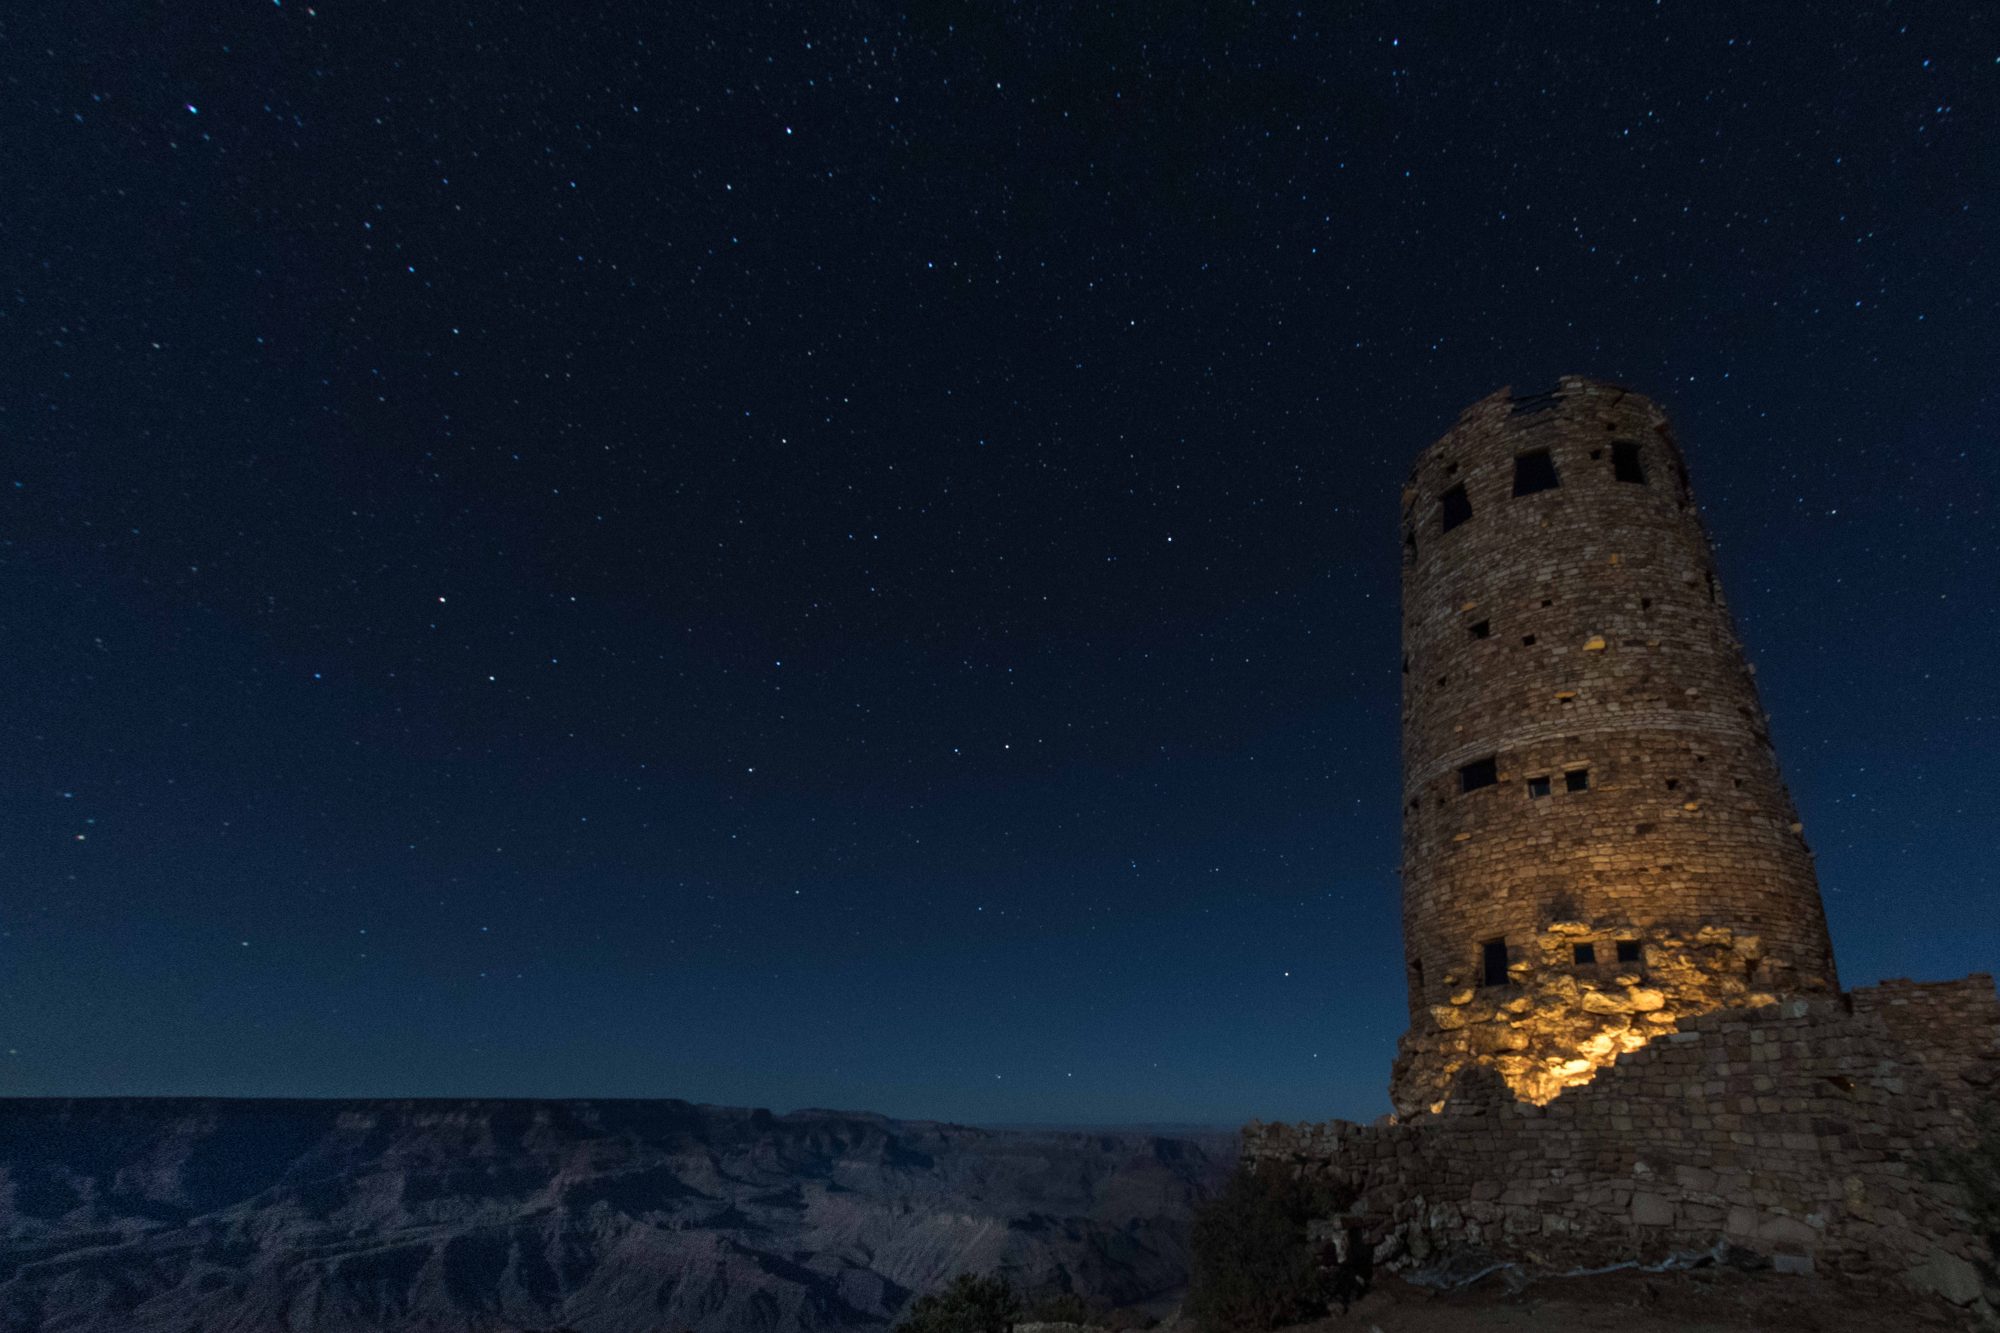 Night photograph of the Grand Canyon, the Watch Tower, and starlit sky